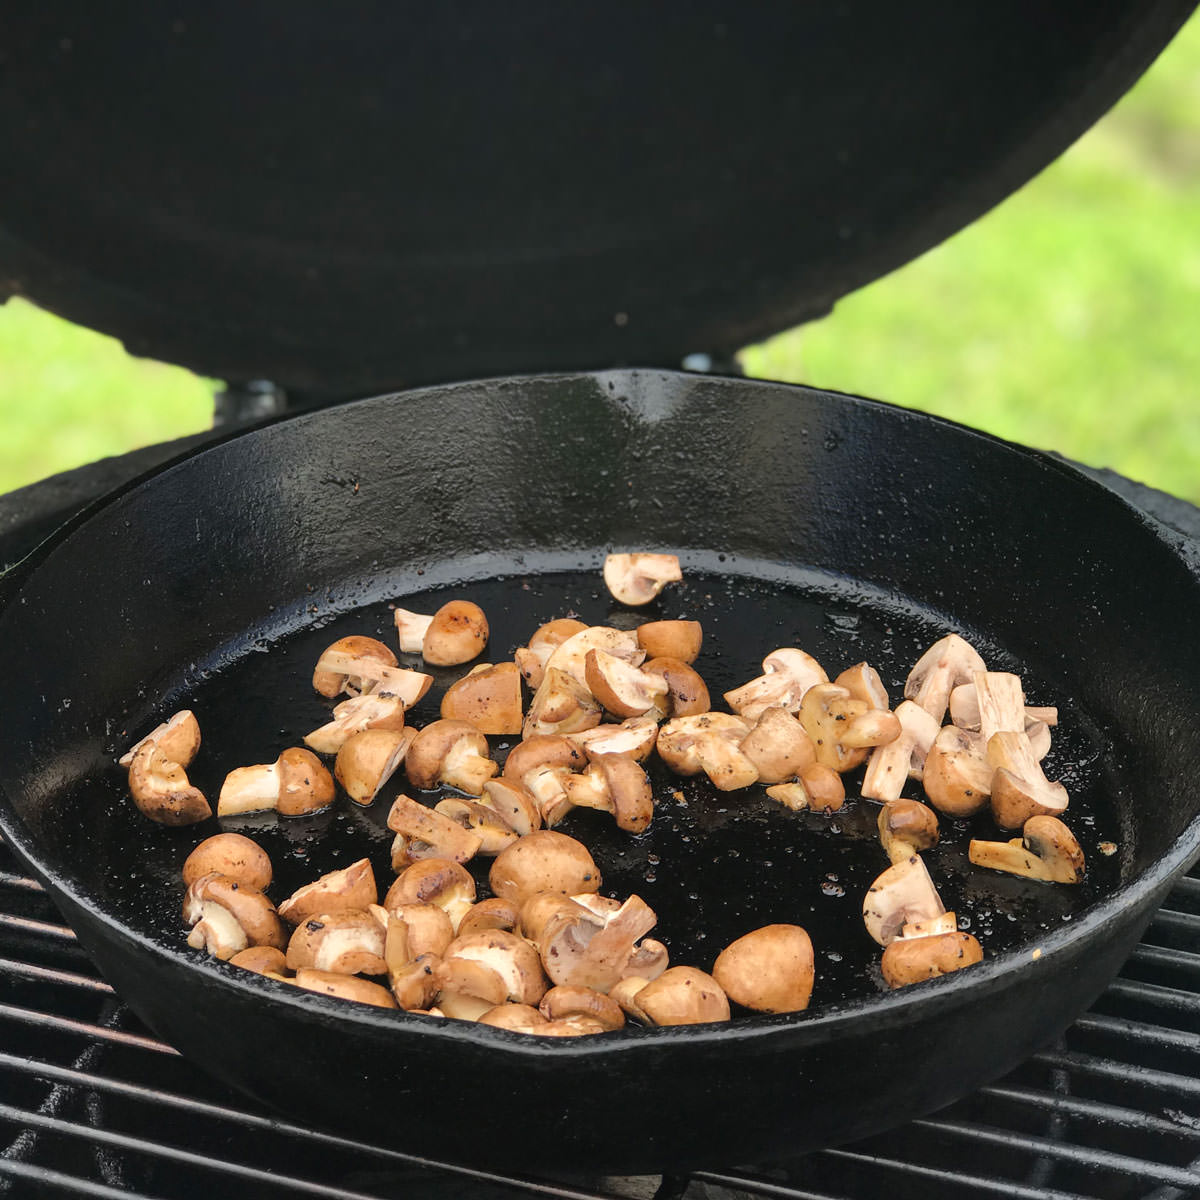 Cook mushrooms for a few minutes until they begin to brown